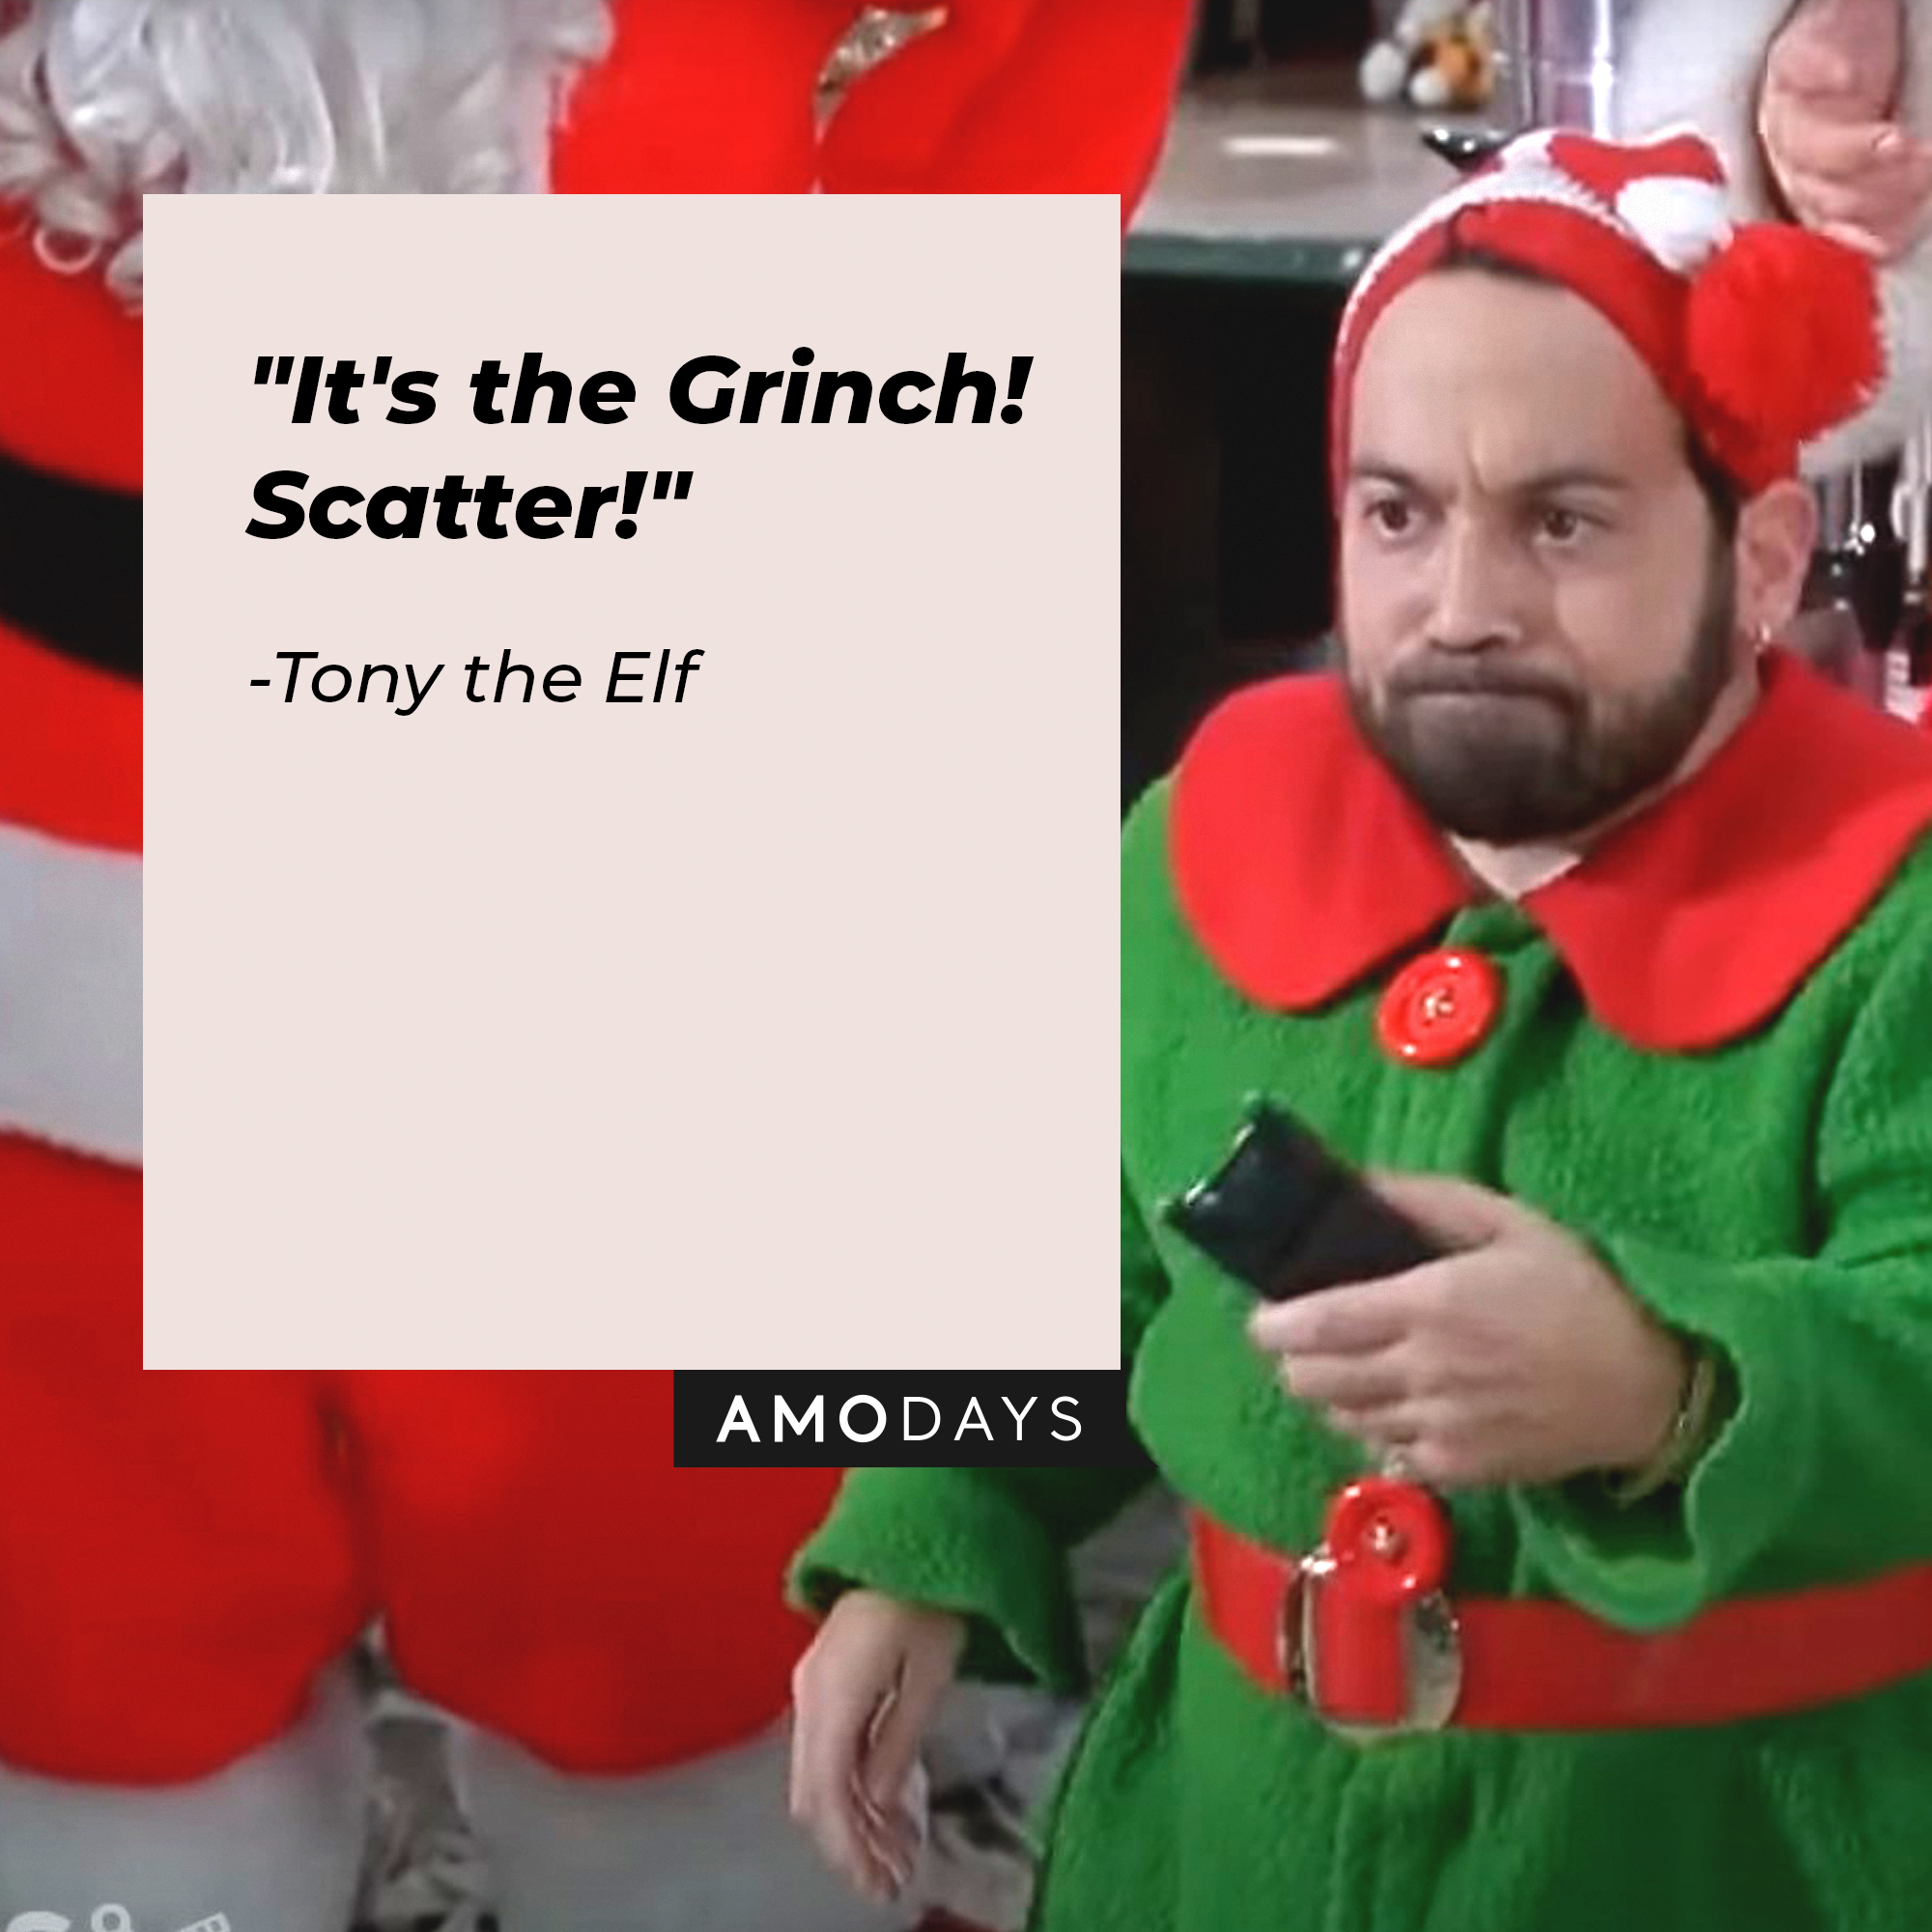 Tony the Elf's quote: "It's the Grinch! Scatter!" | Source: Facebook.com/JingleAllTheWayMovies